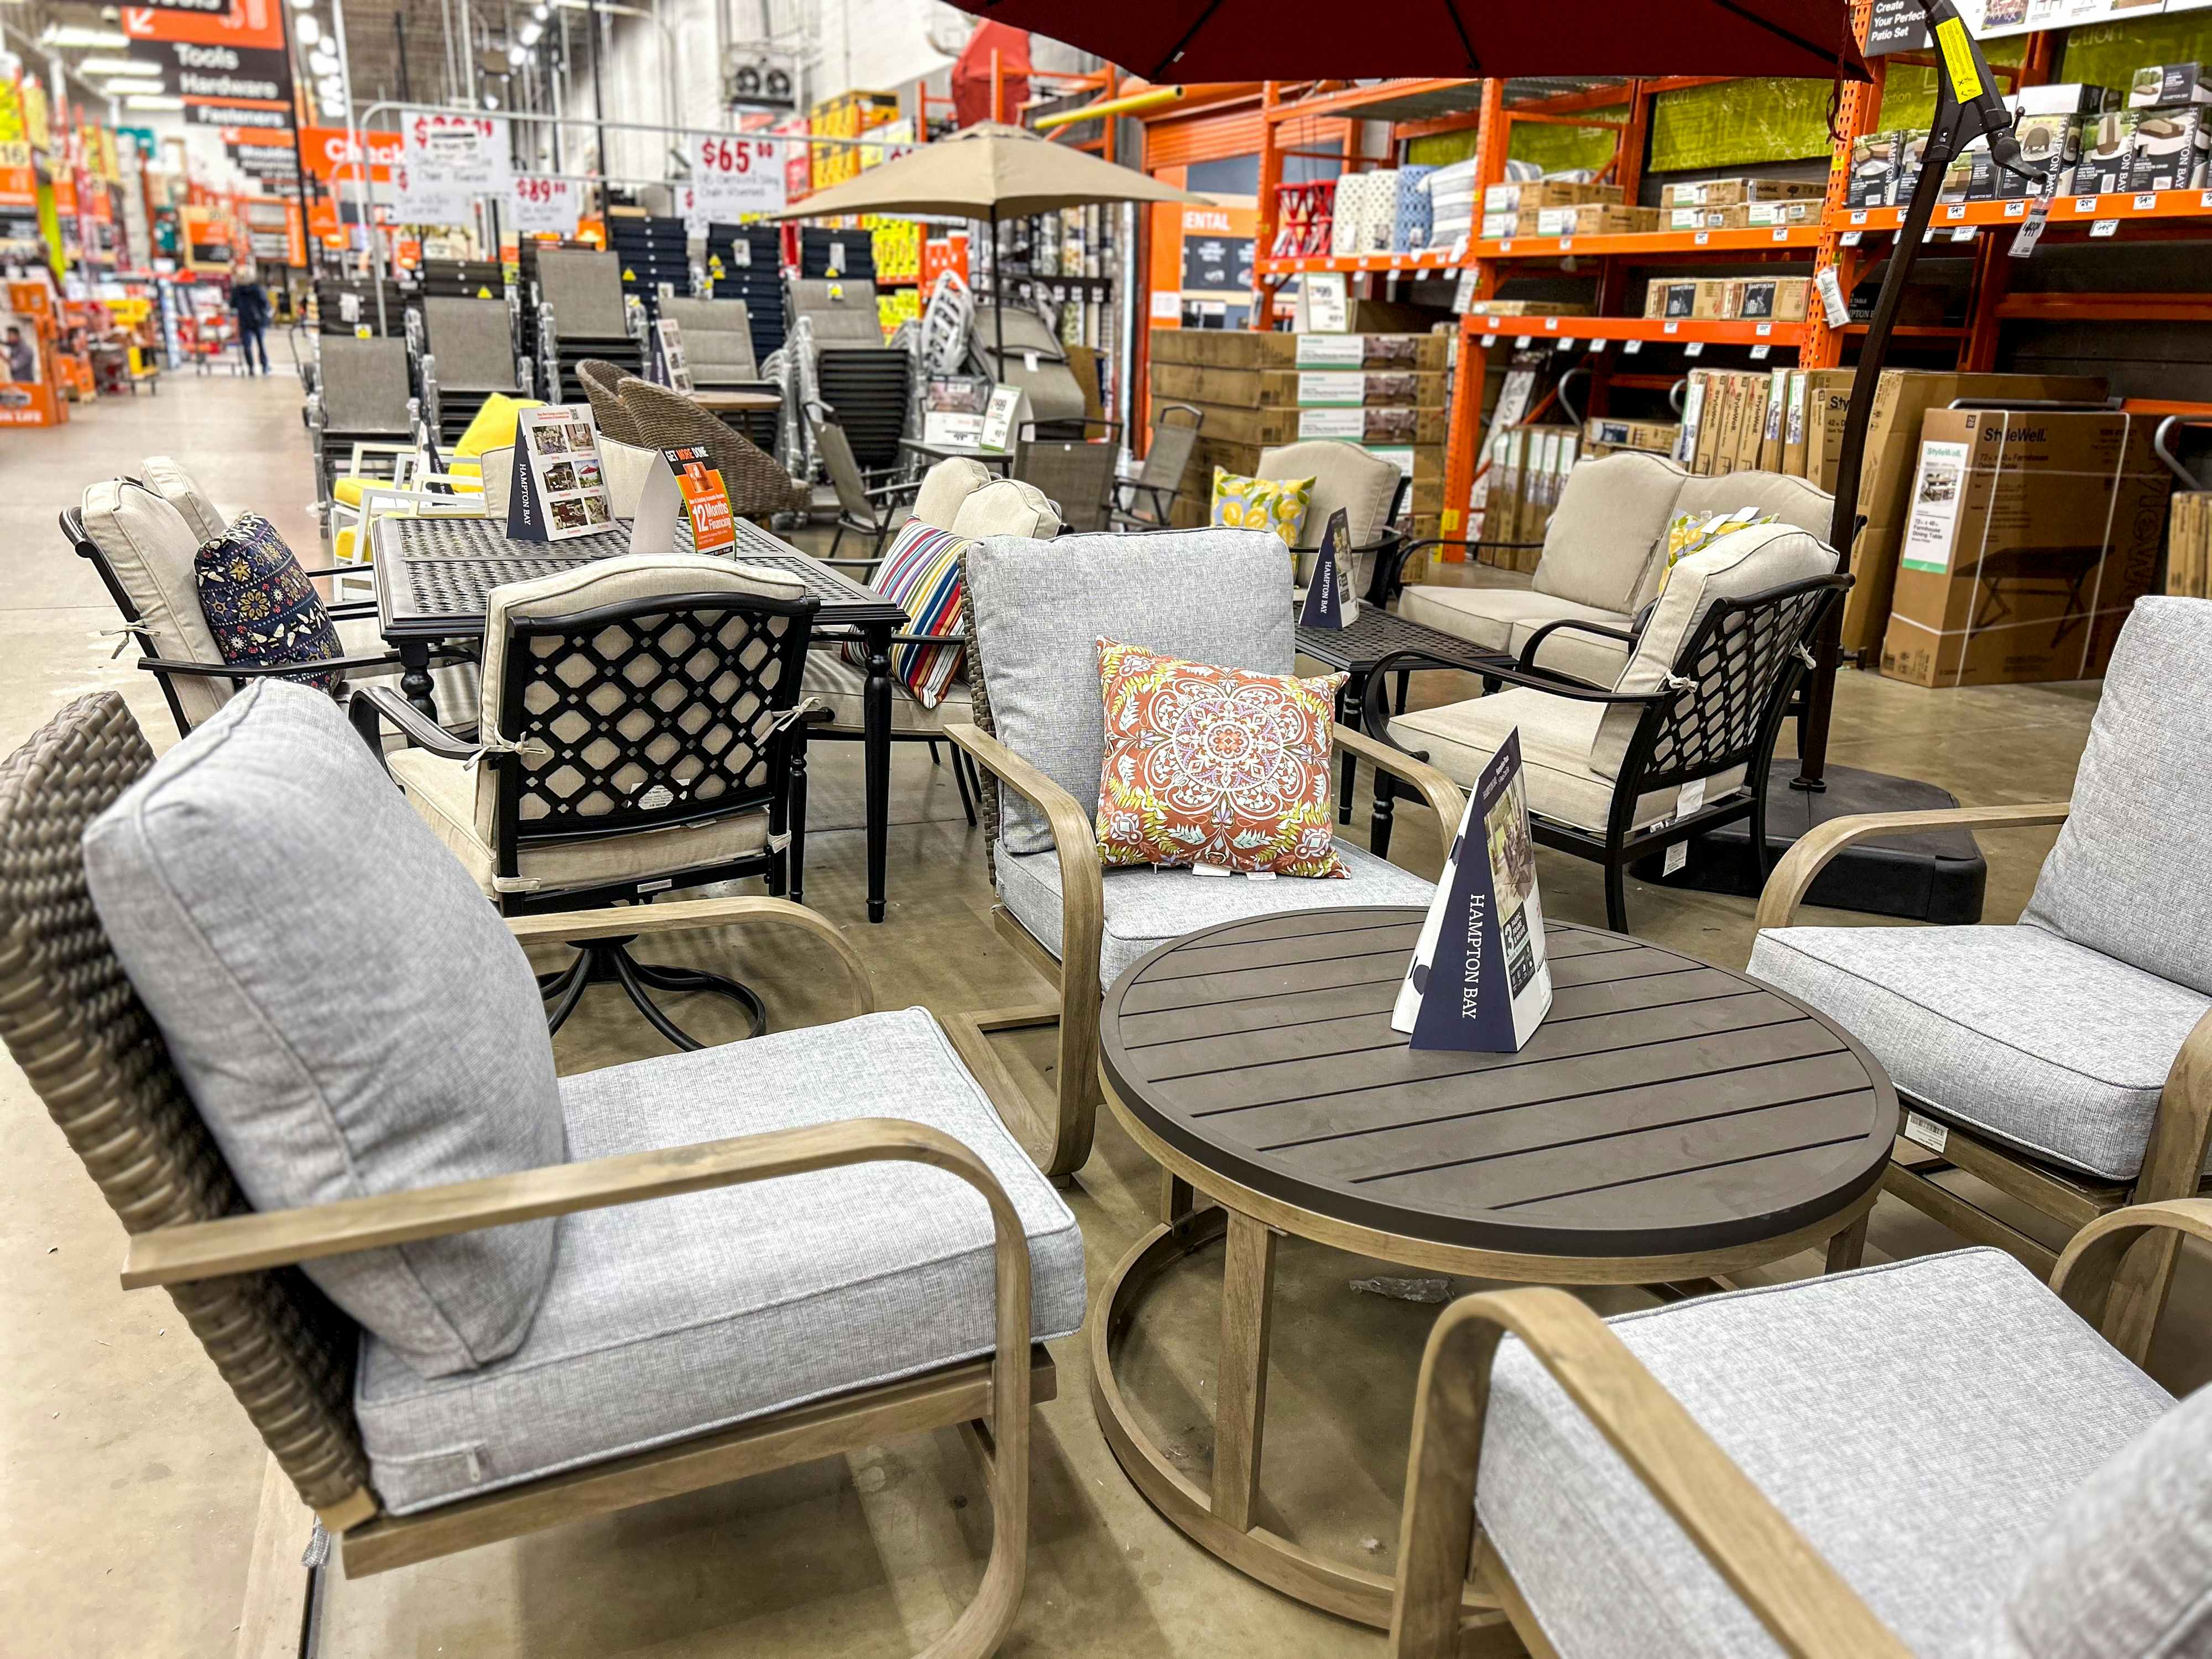 Get Up to 77% Off Patio Sets Online at Home Depot